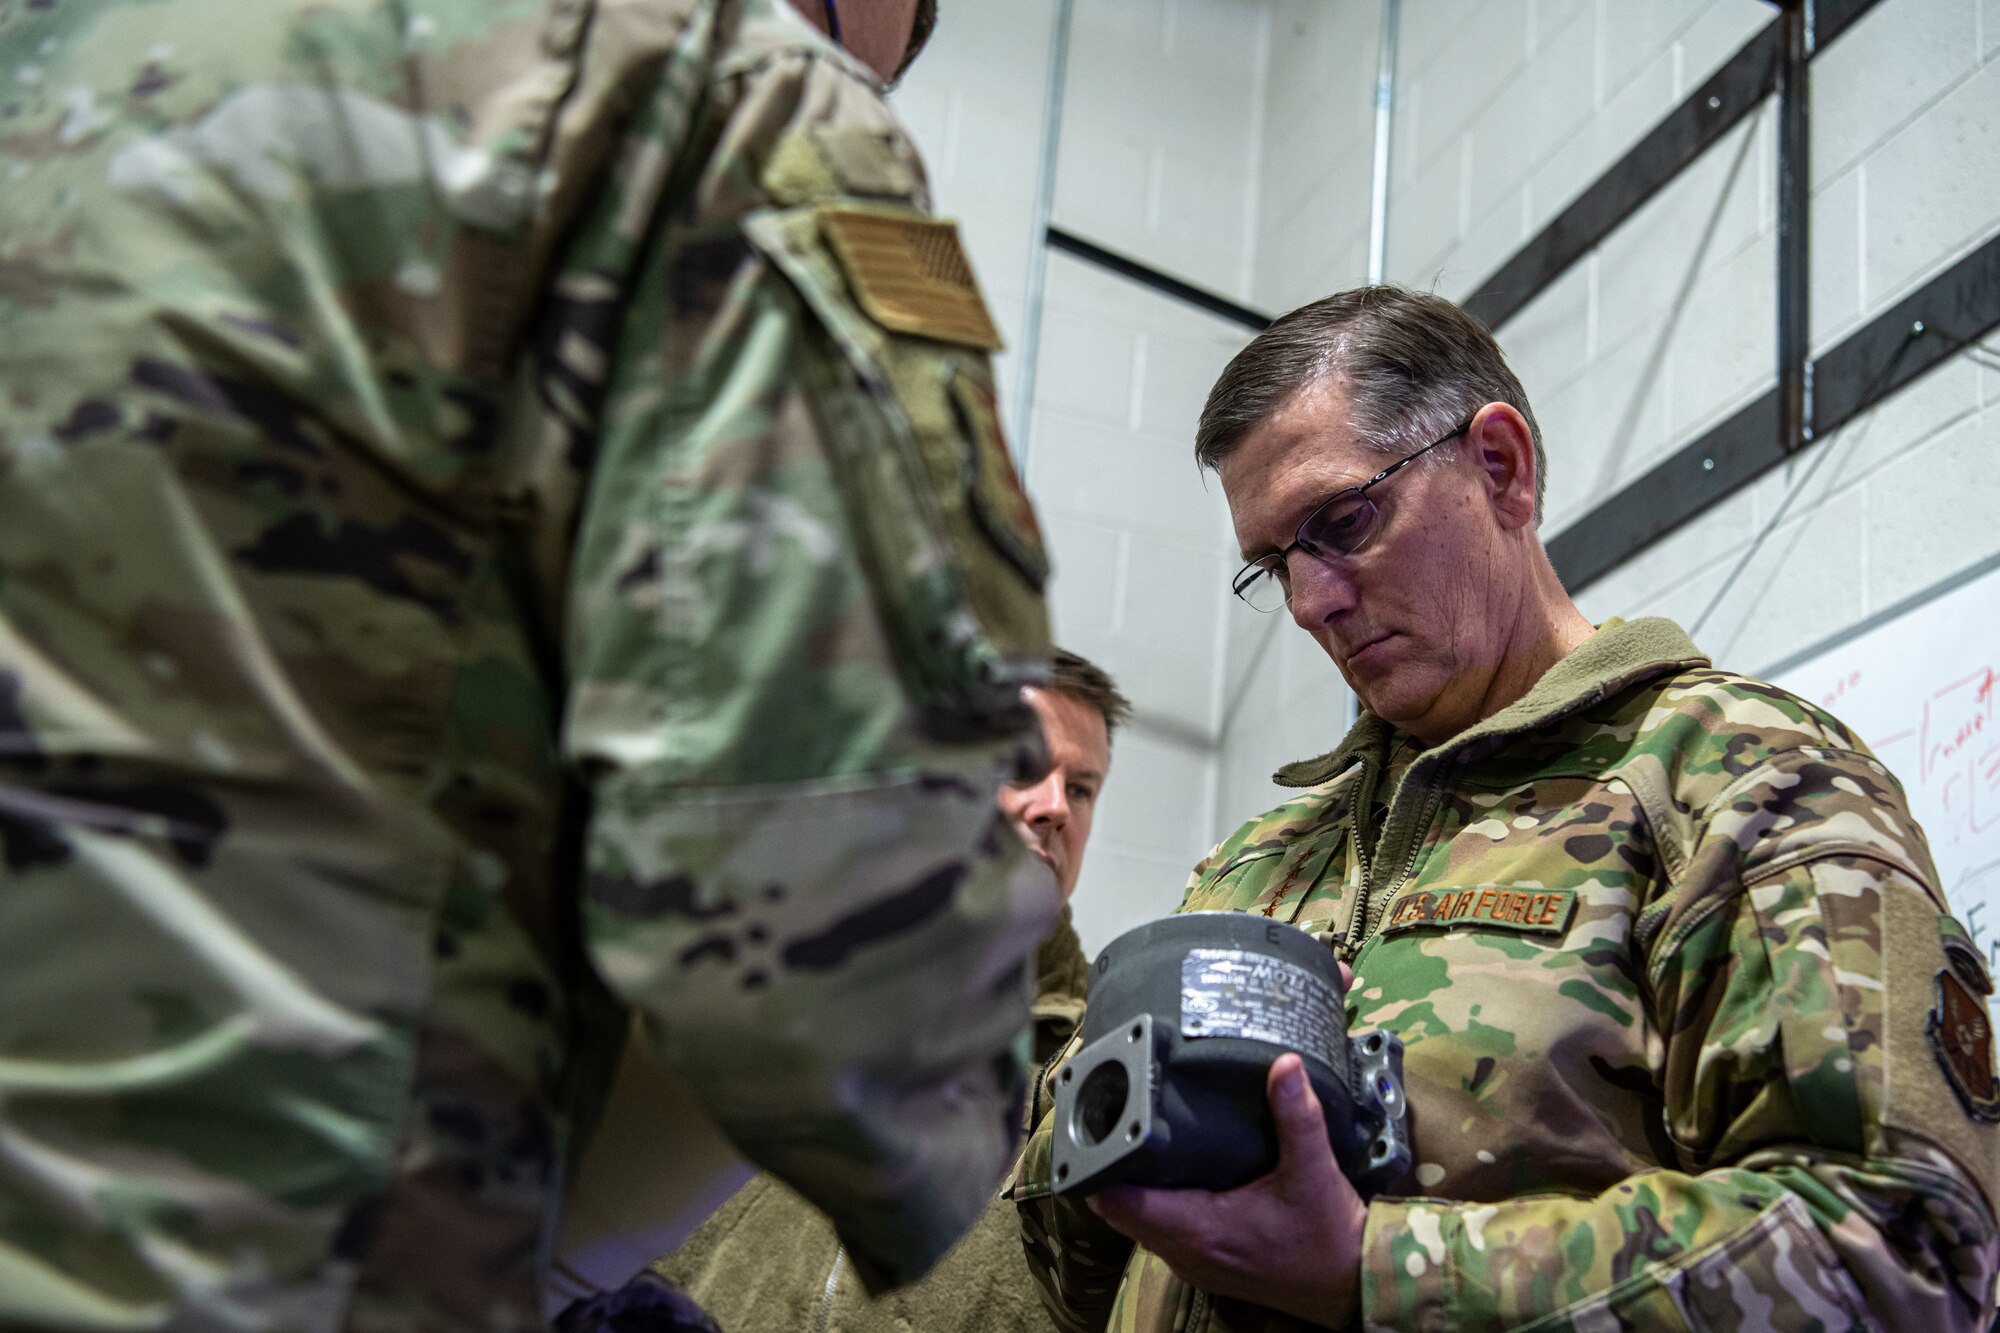 Gen. Tim Ray, Air Force Global Strike Command commander, receives information on equipment being used to maintain the B-1B Lancer fleet on Ellsworth Air Force Base, S.D., during a tour on May 26, 2021.